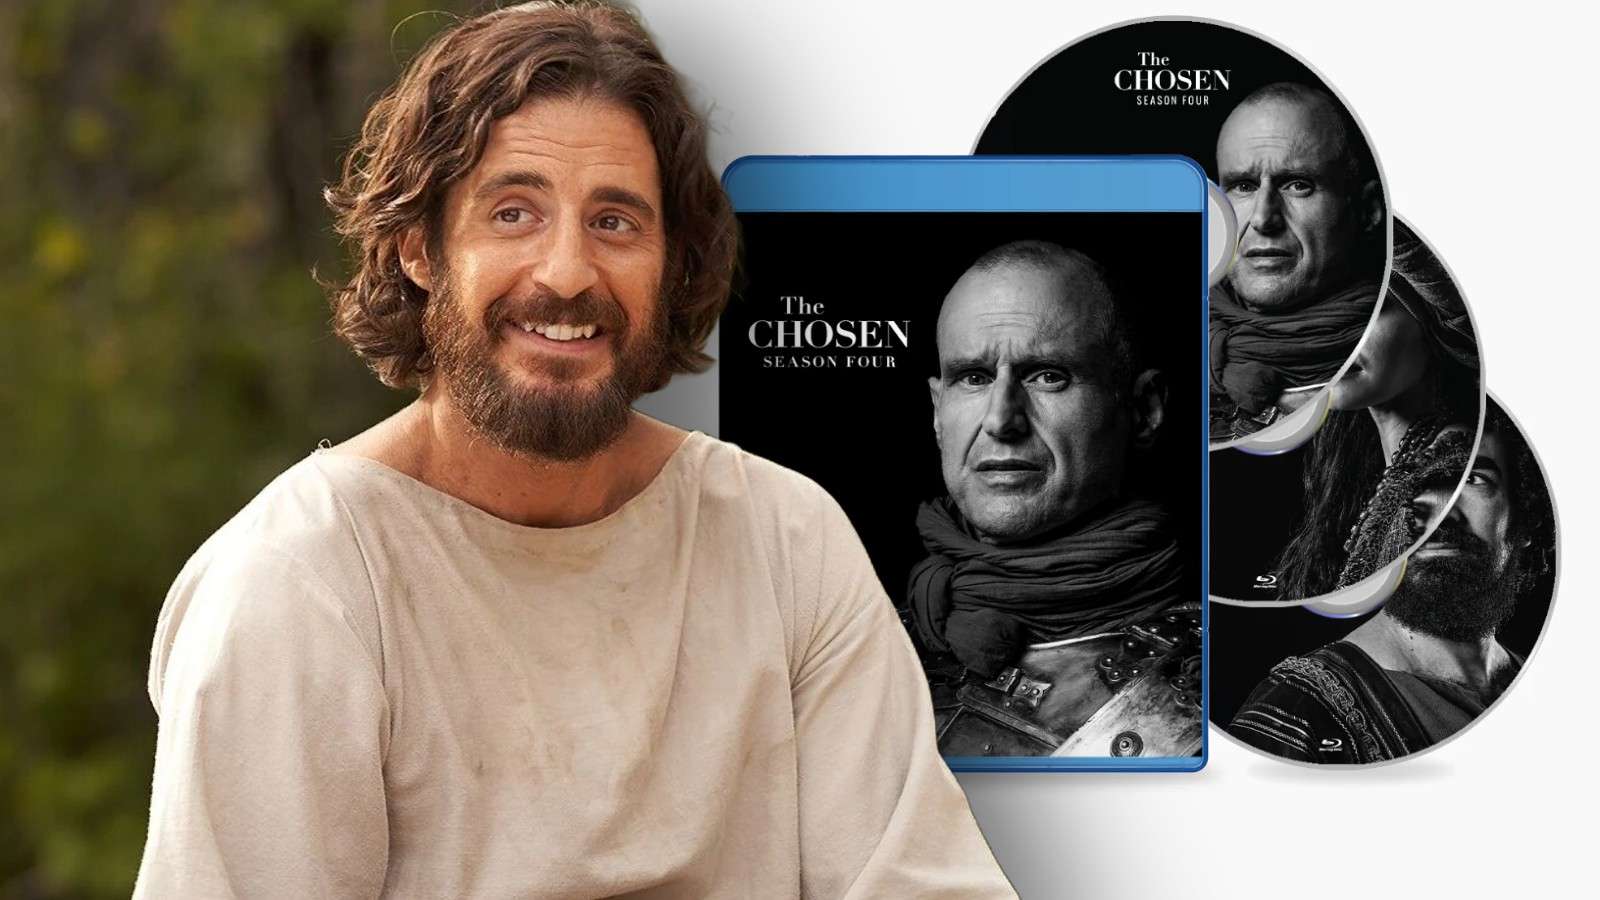 Jesus in The Chosen and the Season 4 Blu-ray